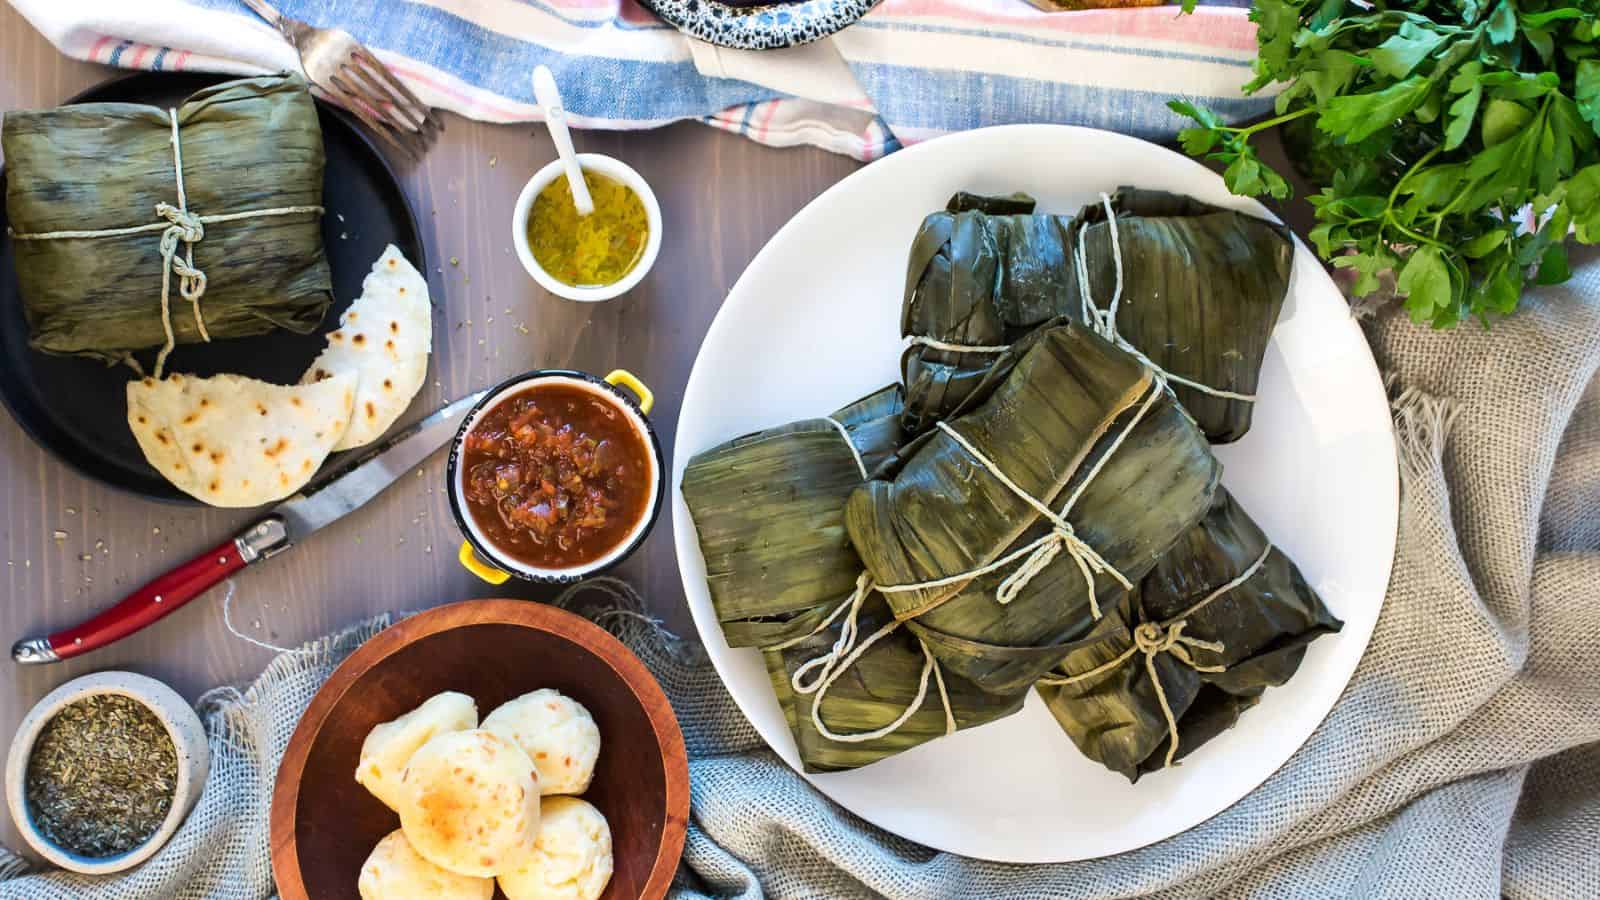 Colombian tamales on a plate.